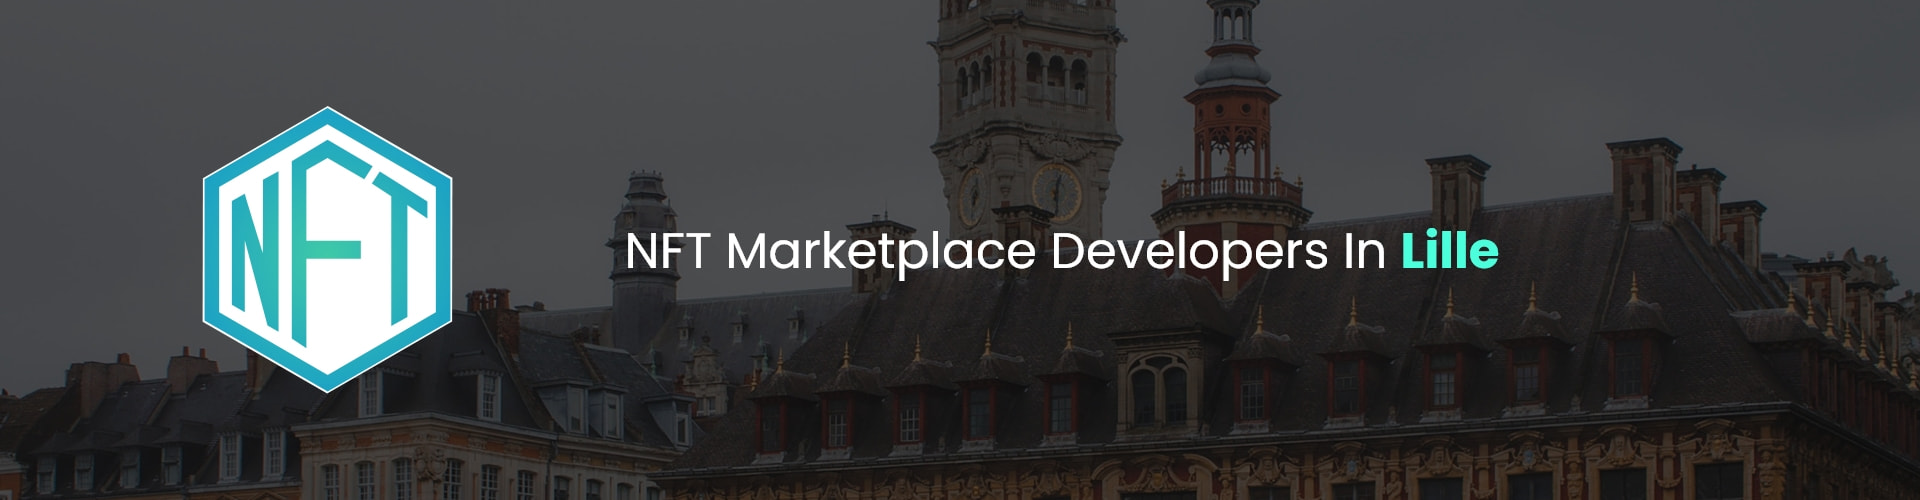 hire nft marketplace developers in lille